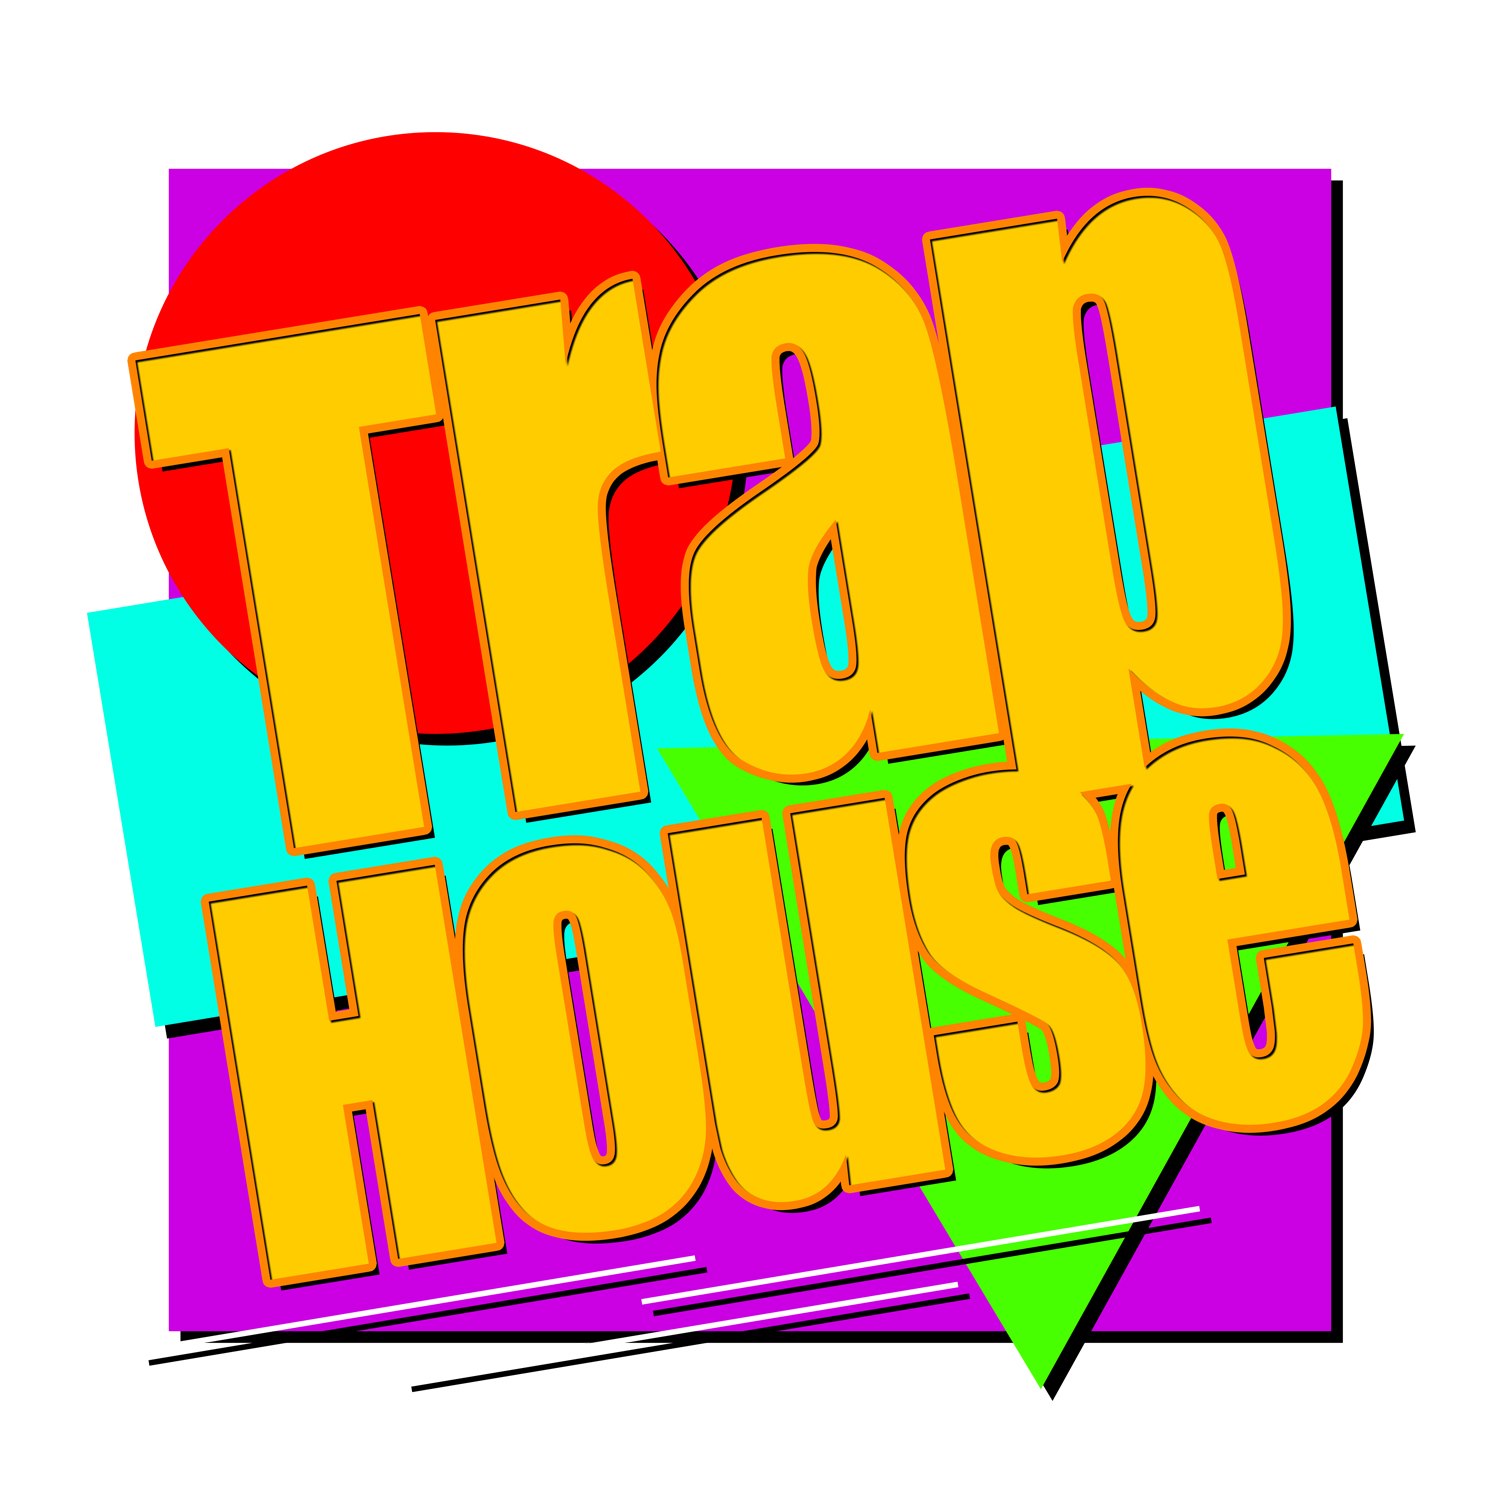 Trap House the Show